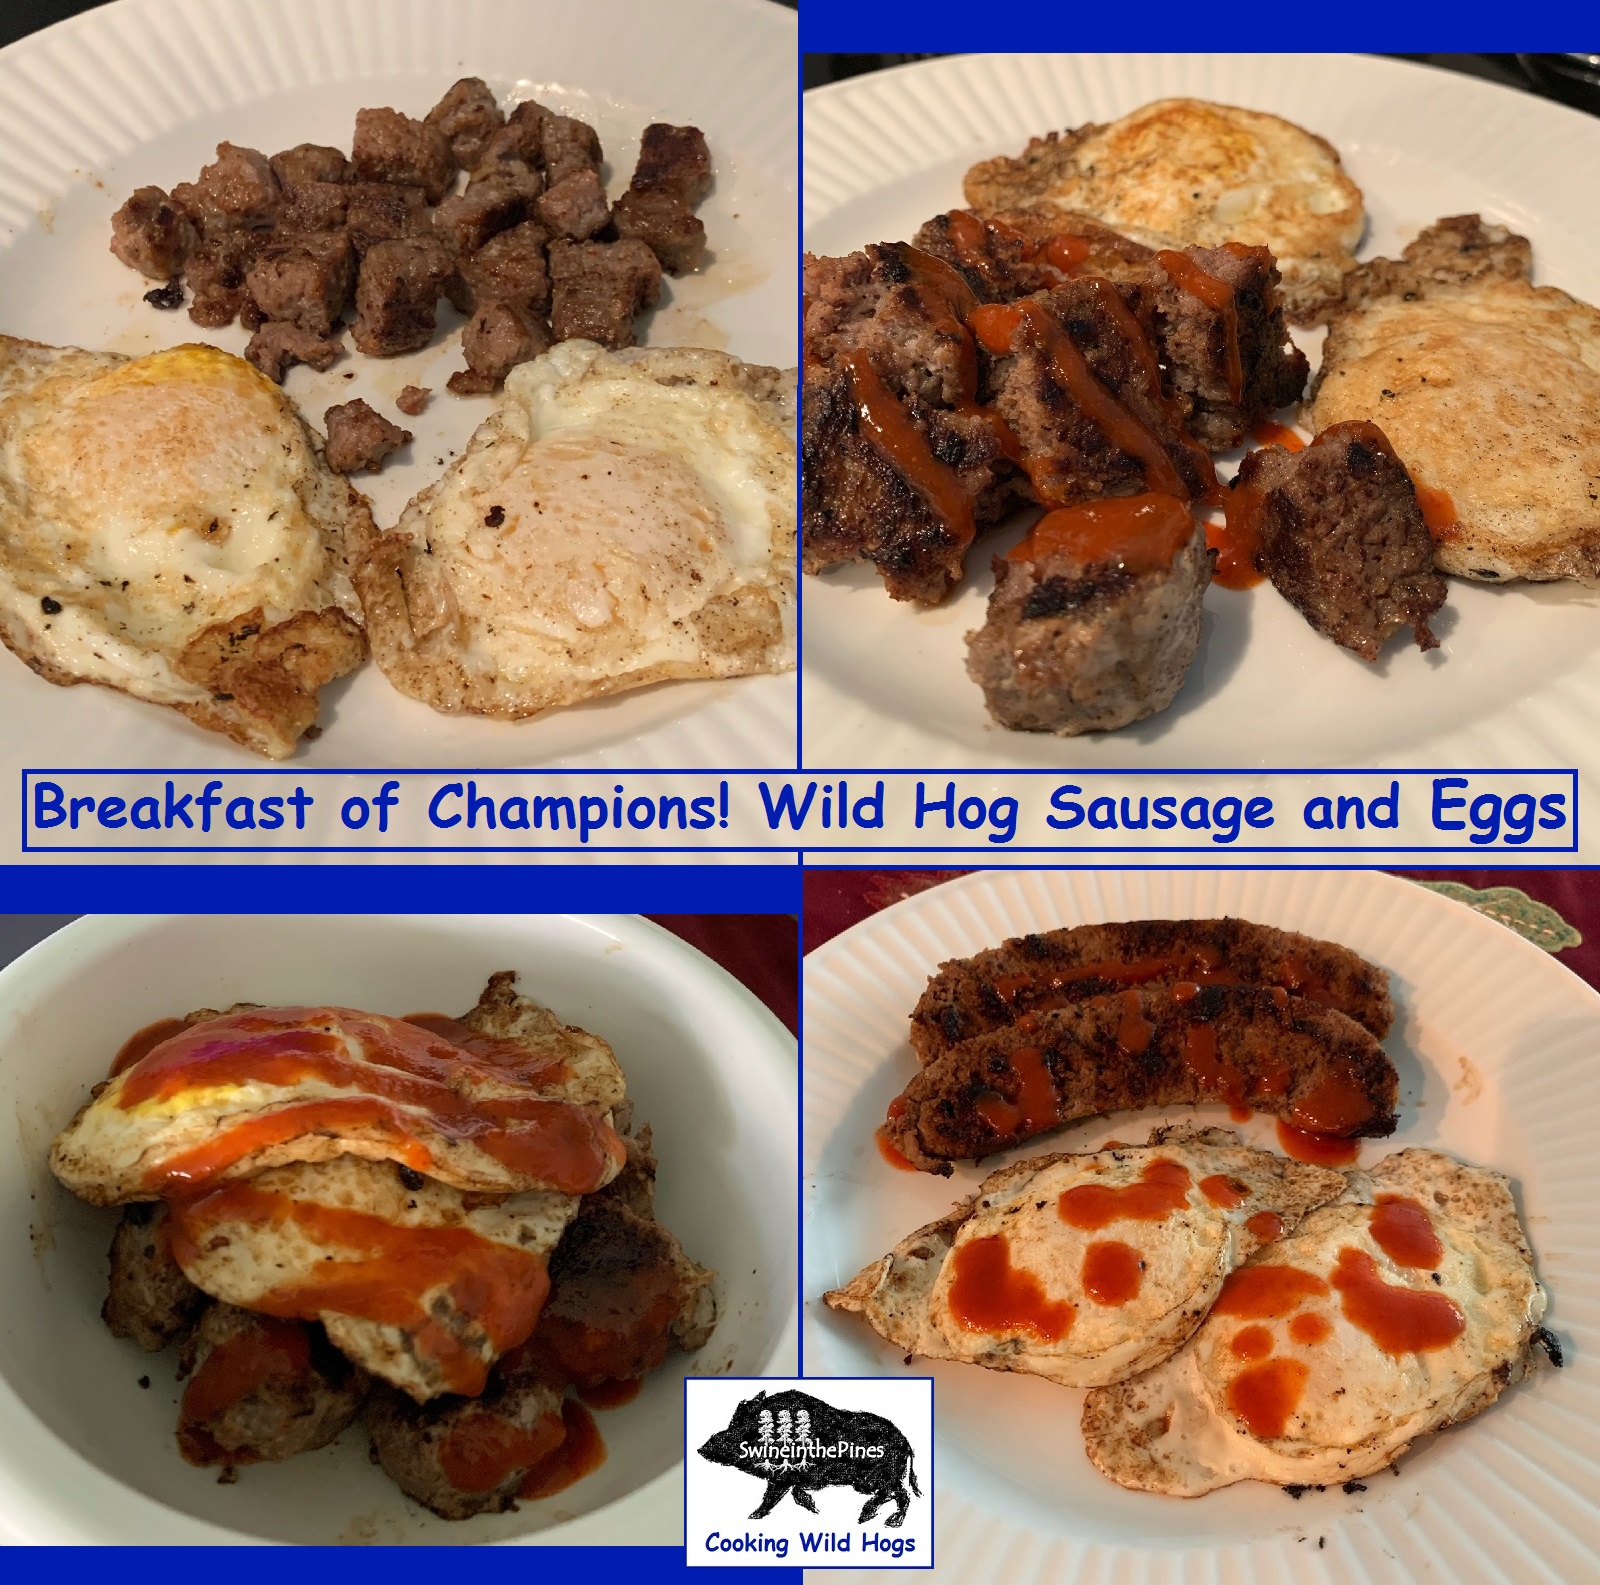 Breakfast of Champions! Wild Hog Sausage and Eggs